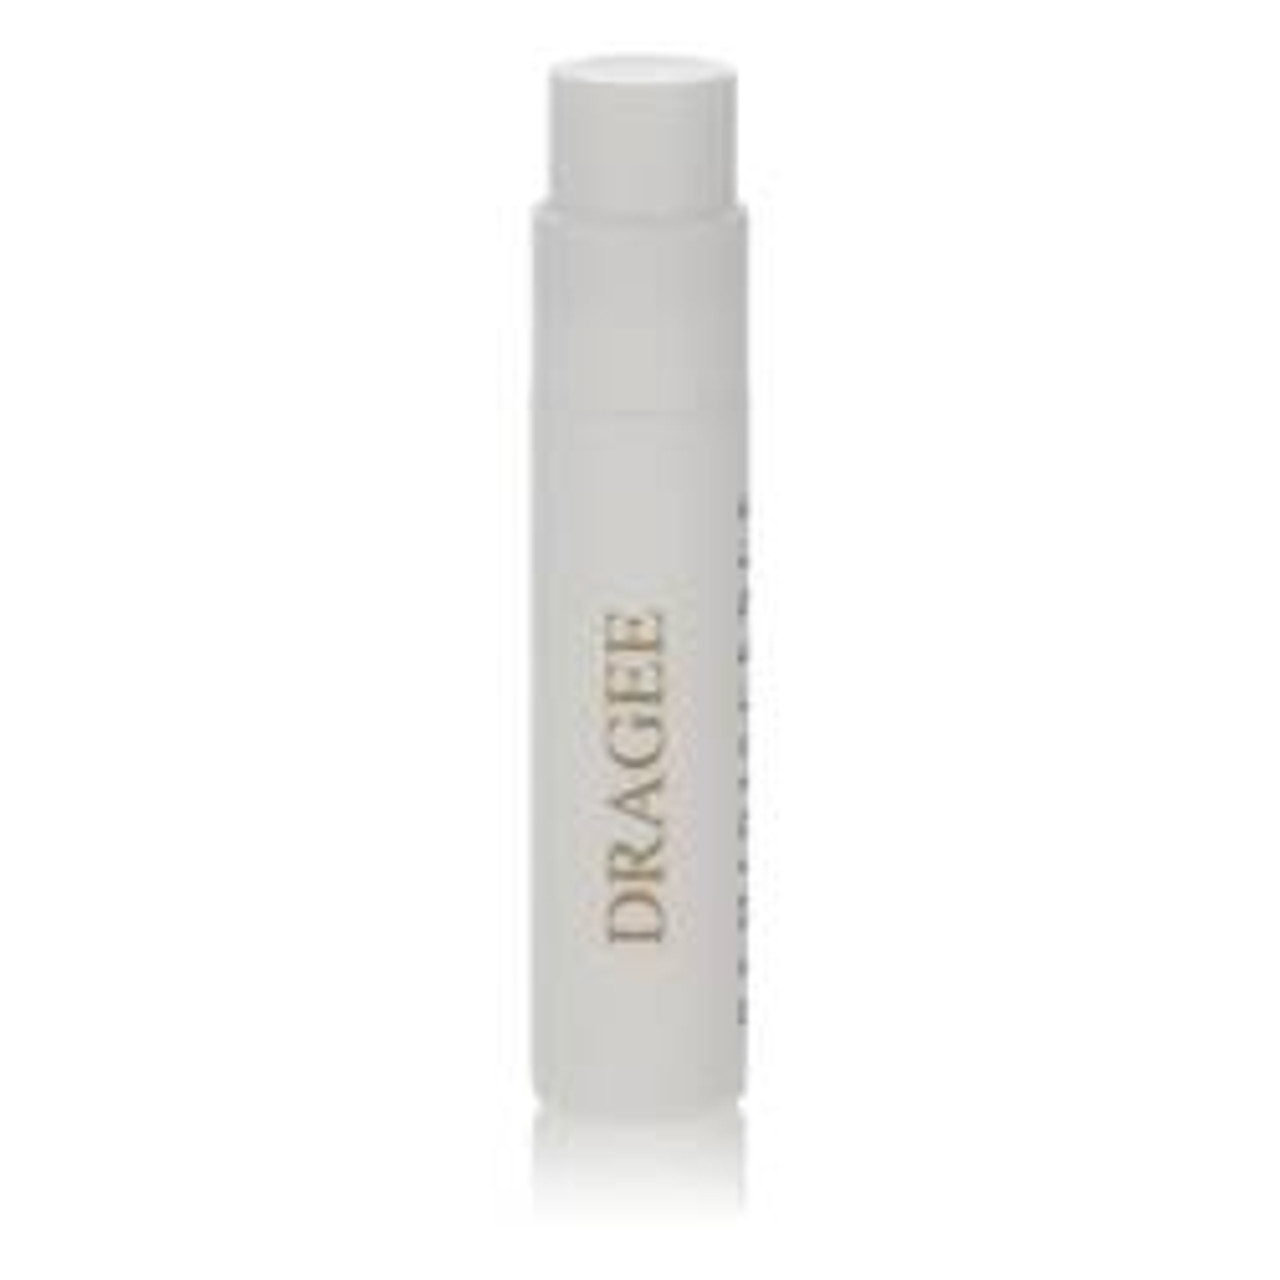 Reminiscence Dragee Perfume By Reminiscence Vial (sample) 0.04 oz for Women - *Pre-Order